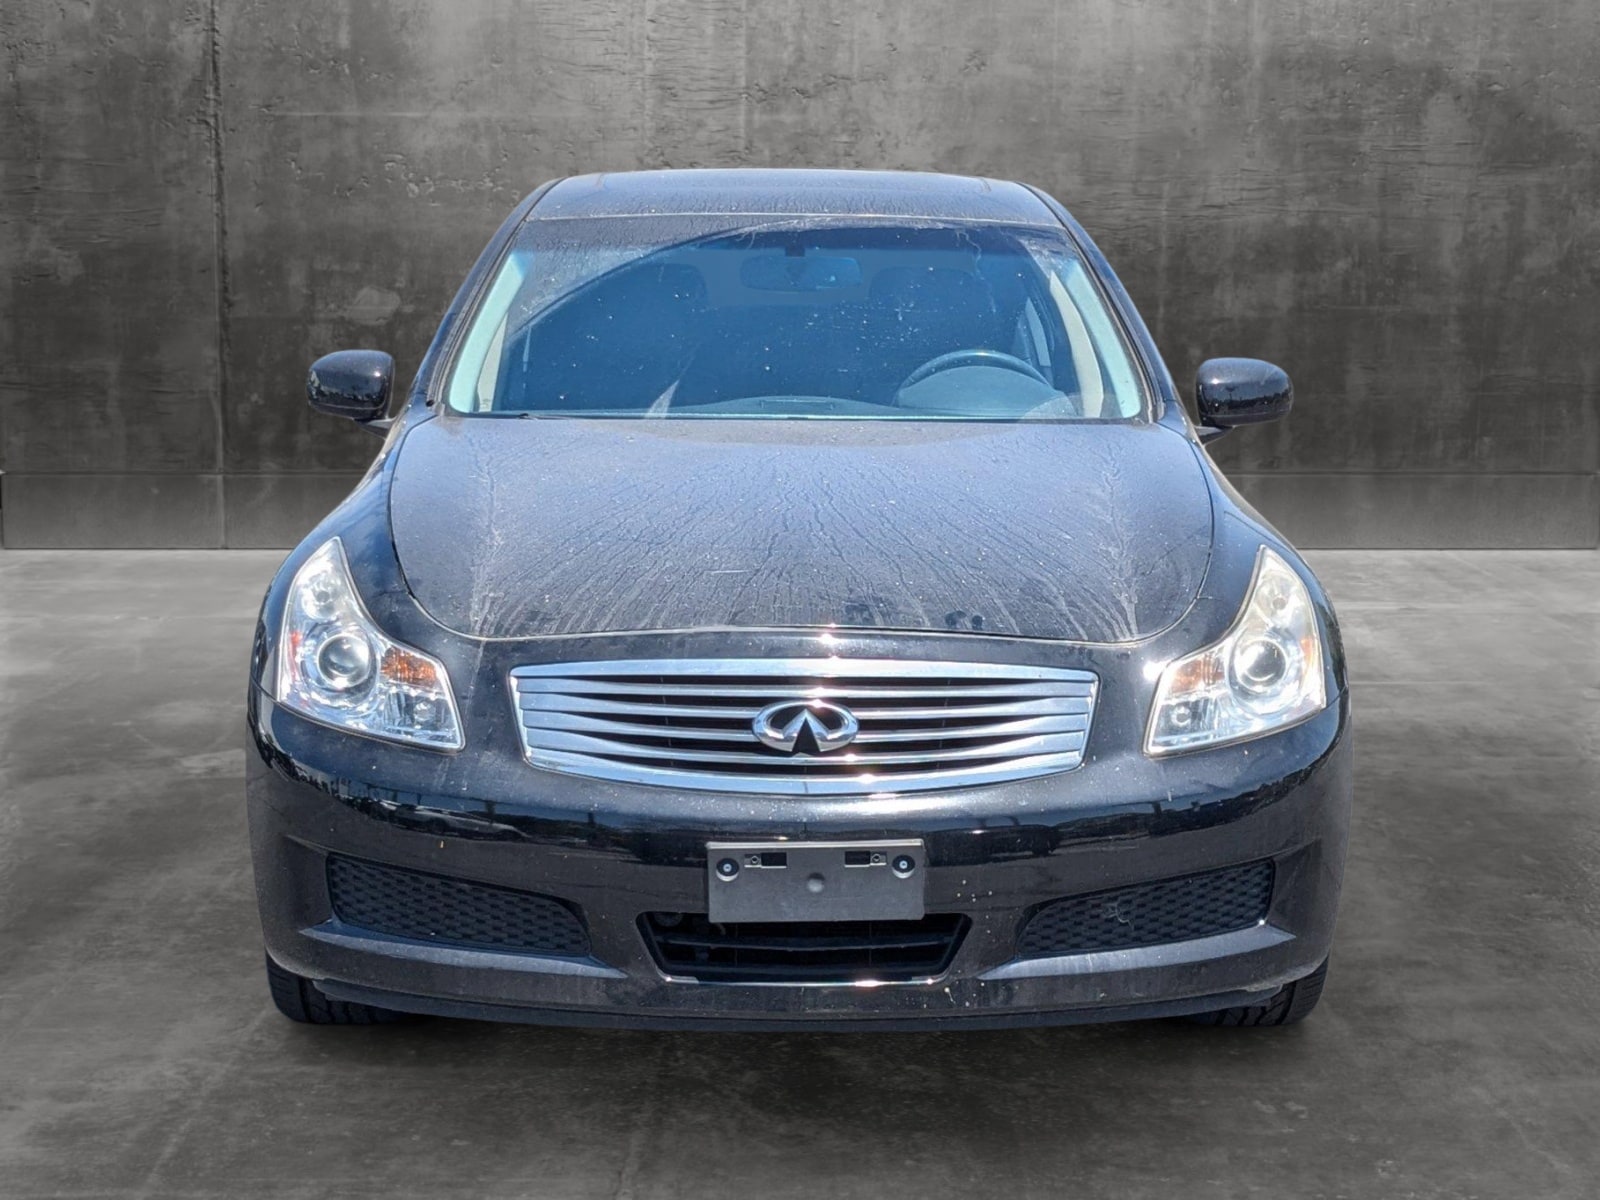 Used 2008 INFINITI G 35 with VIN JNKBV61F18M265691 for sale in Torrance, CA